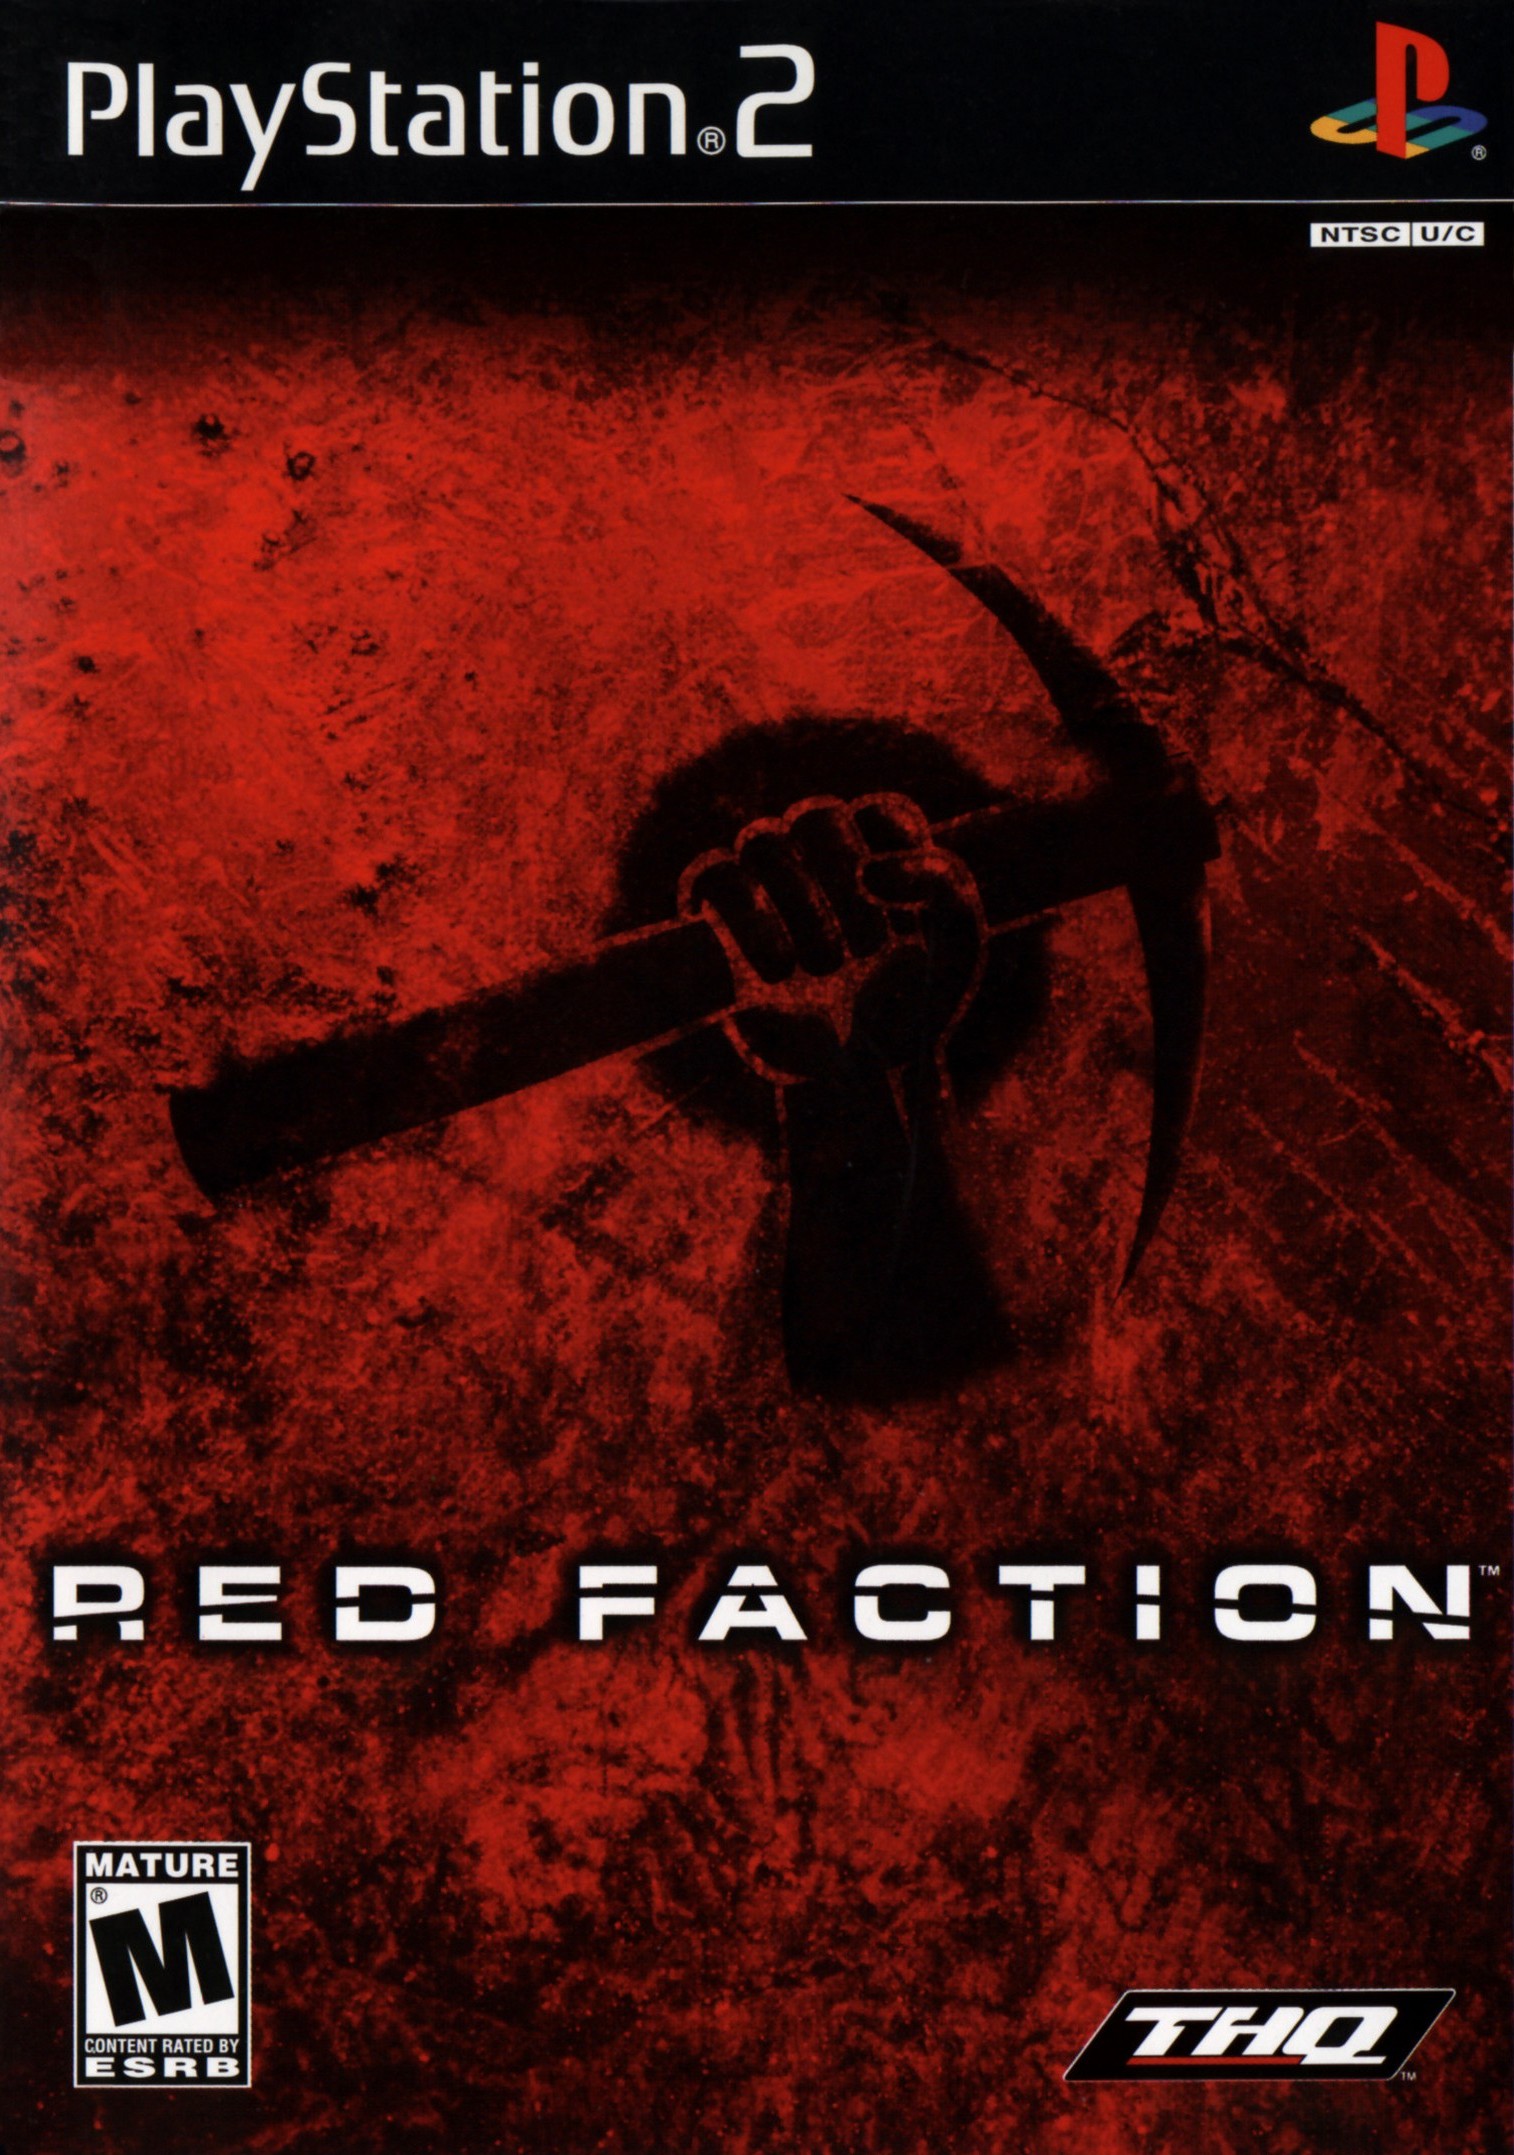 'Red Faction'